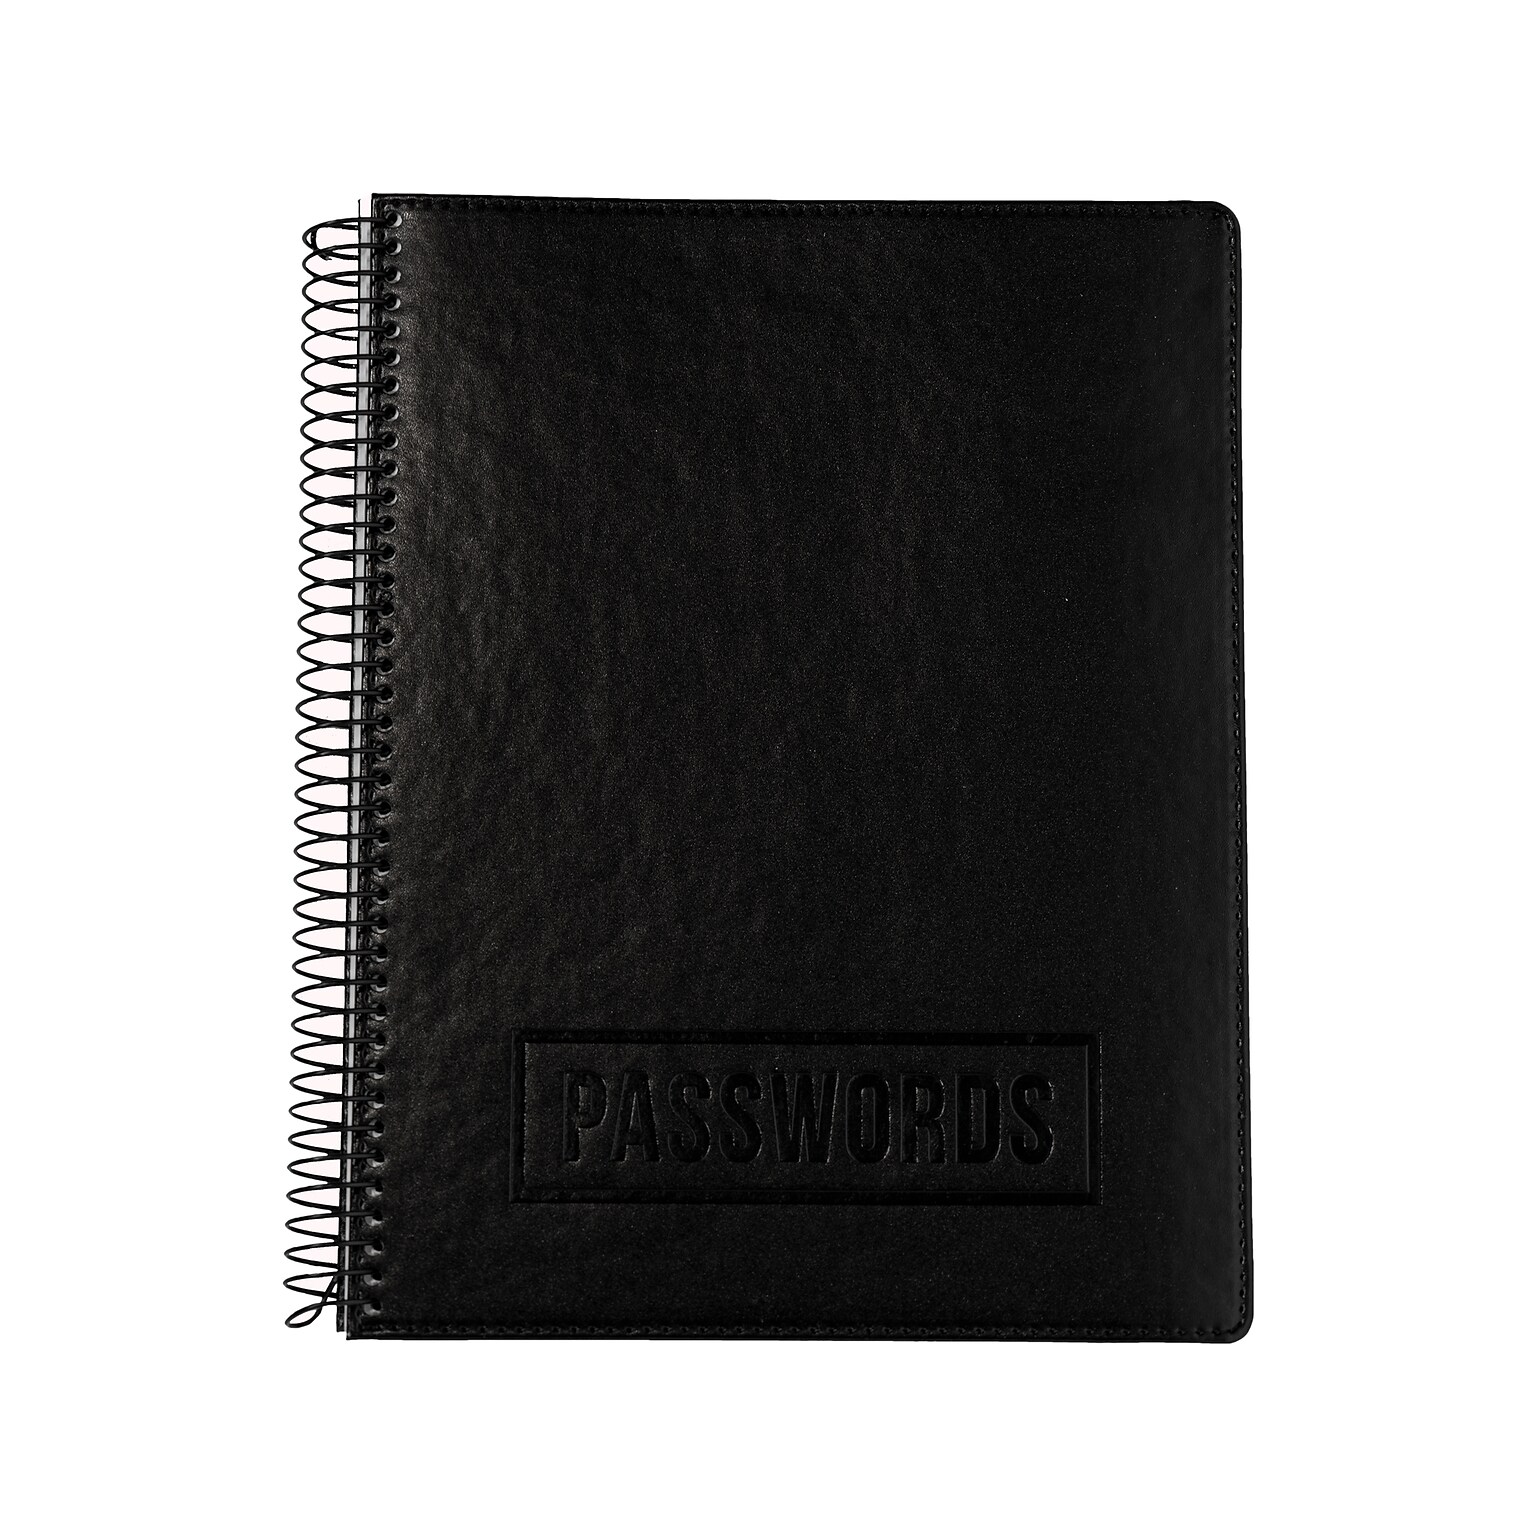 RE-FOCUS THE CREATIVE OFFICE 7.6 x 10 Executive Password Book, Faux Leather Black (10007)